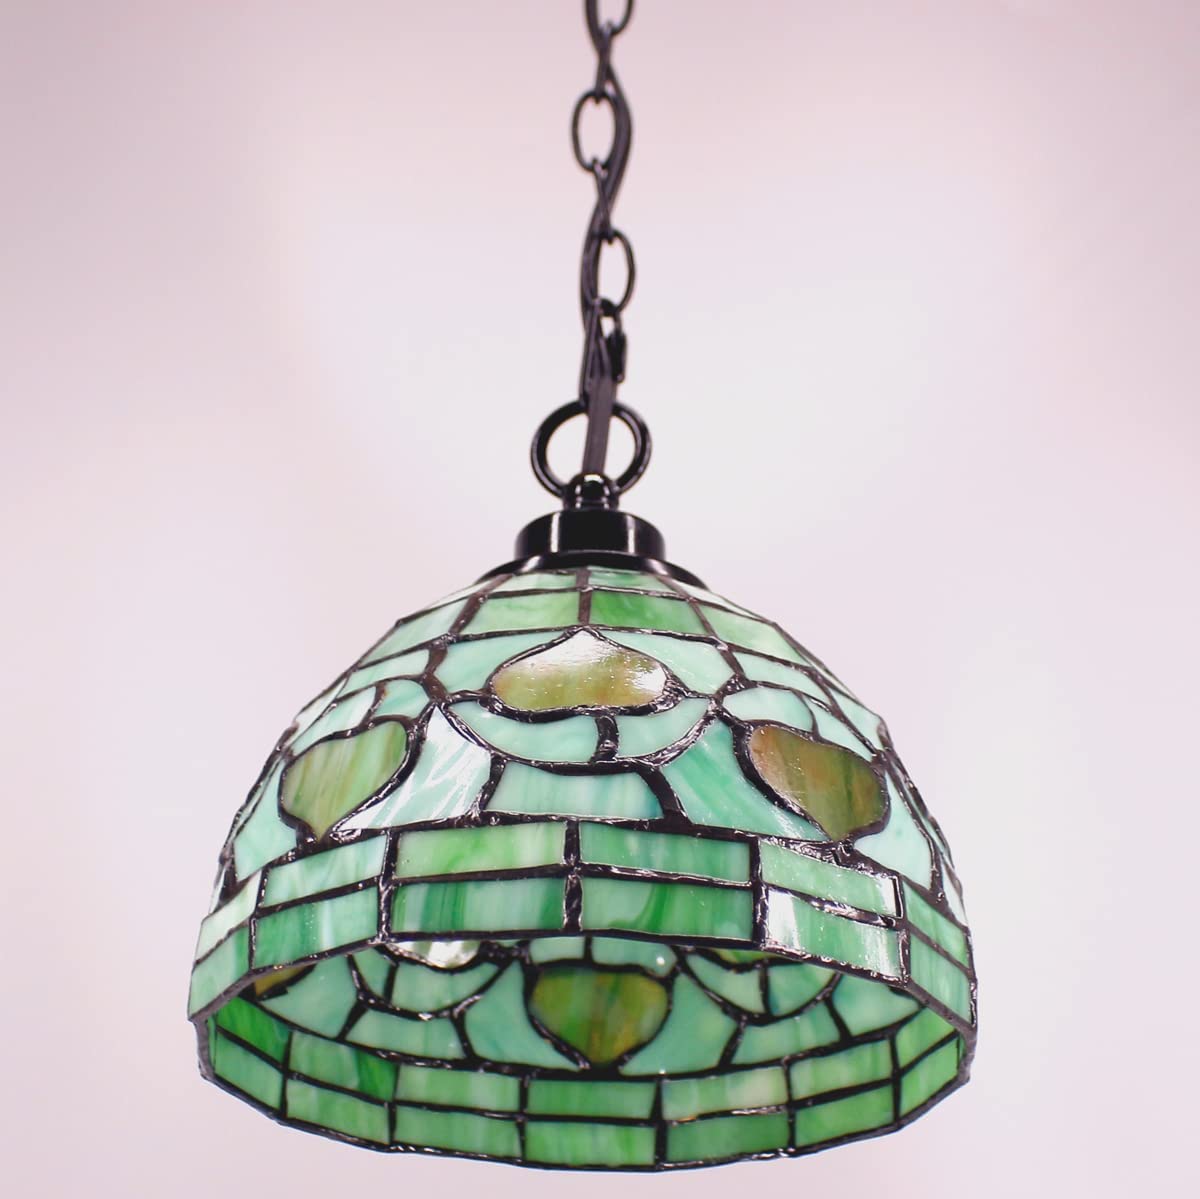 Werfactory® Small Tiffany Style Plug in Pendant Light Mini Stained Glass Chandelier